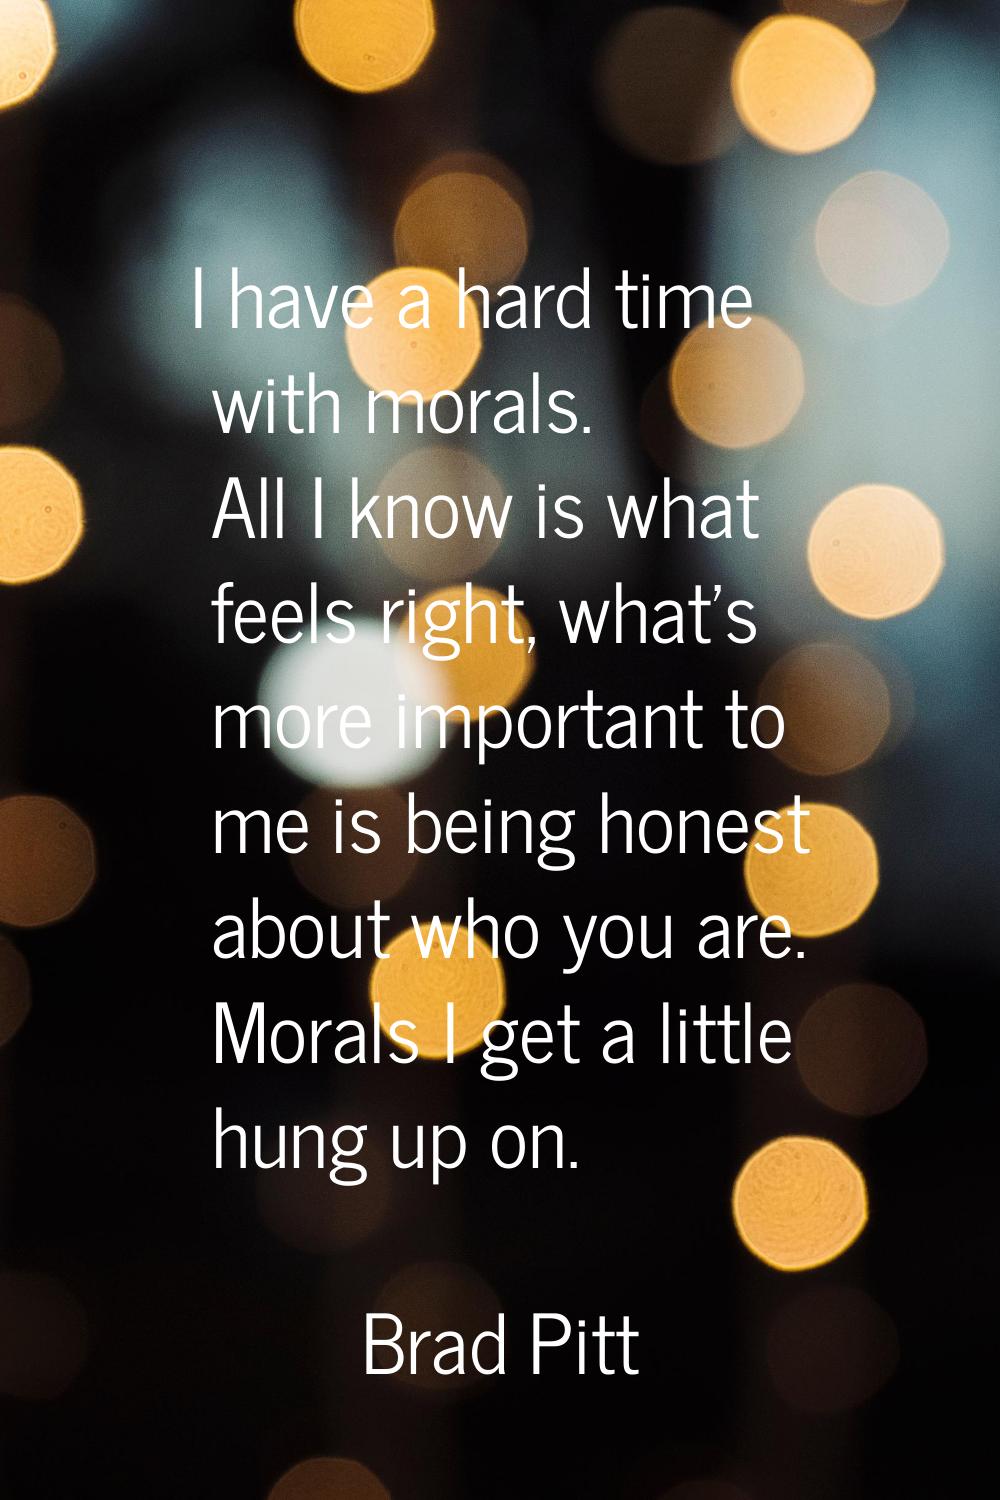 I have a hard time with morals. All I know is what feels right, what's more important to me is bein